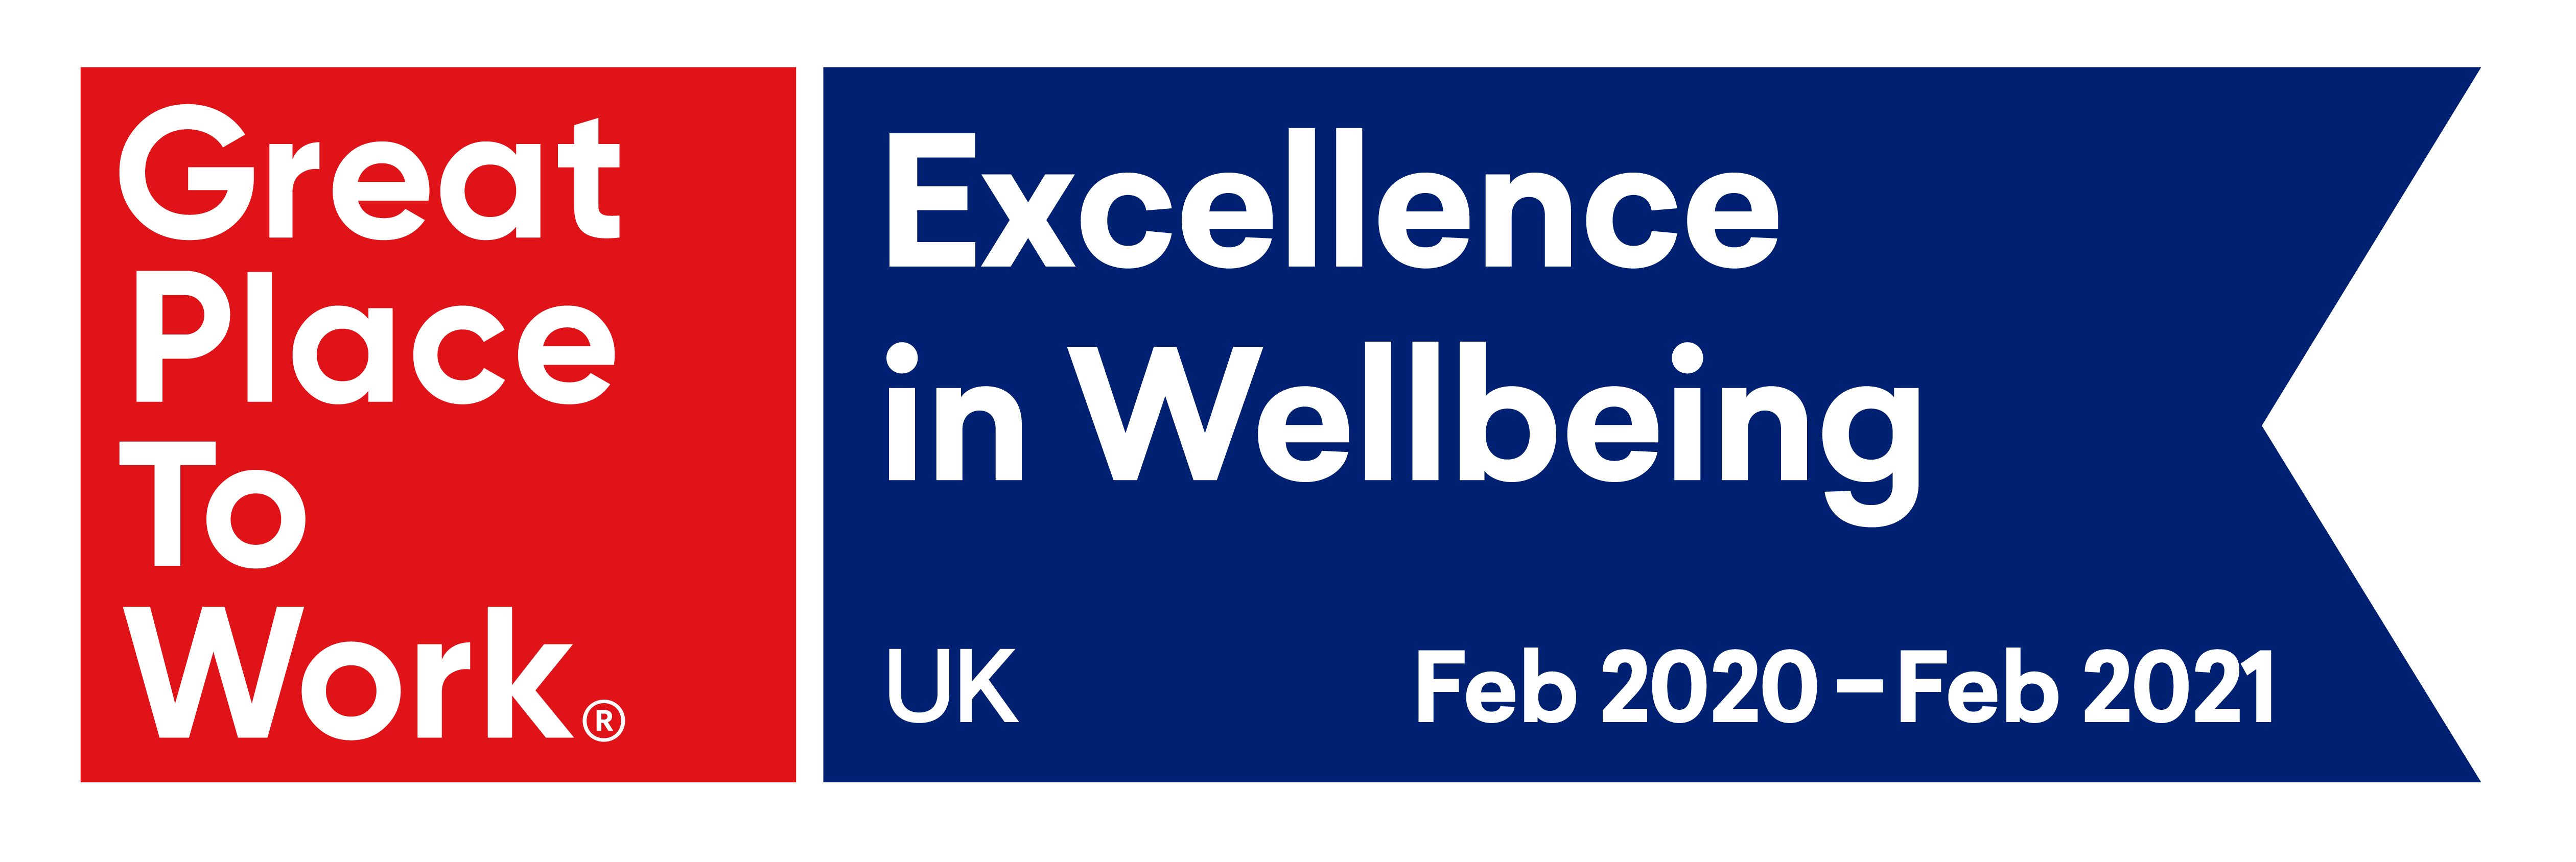 Awards and recognitions slider GPTW Excellence in Wellbeing (RGB)_Feb 2020 ÔÇô Feb 2021